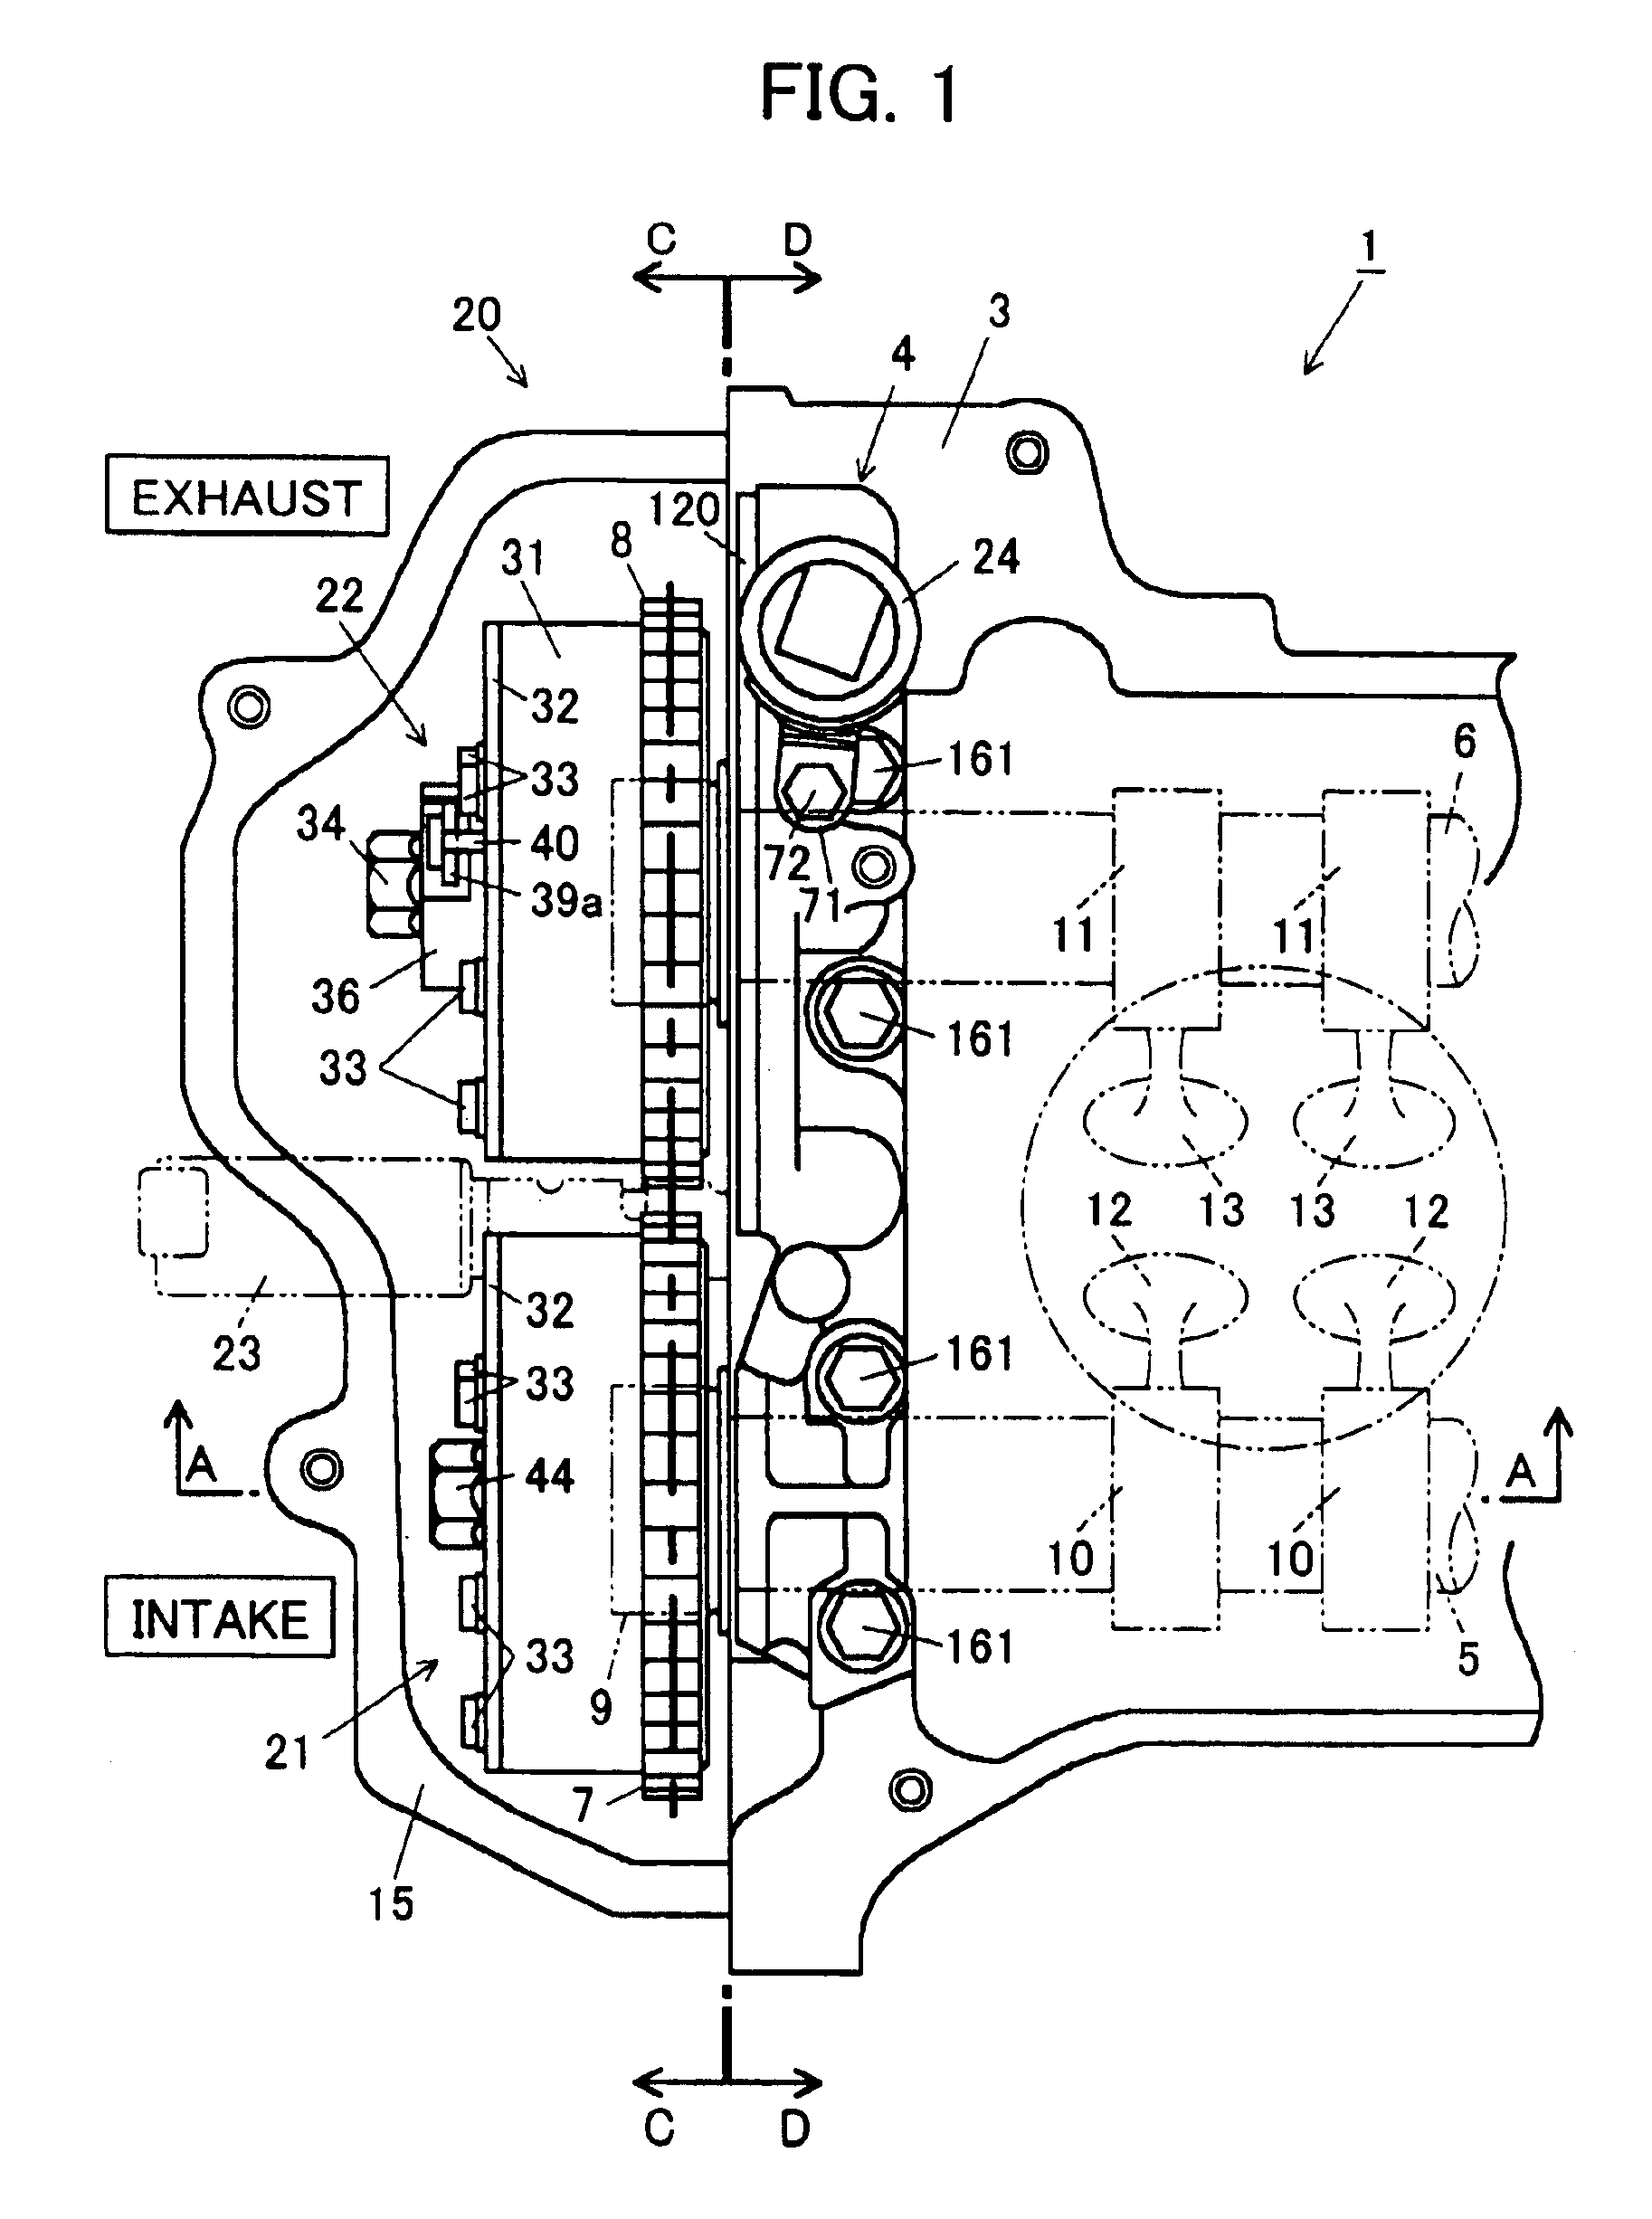 Engine variable valve timing system